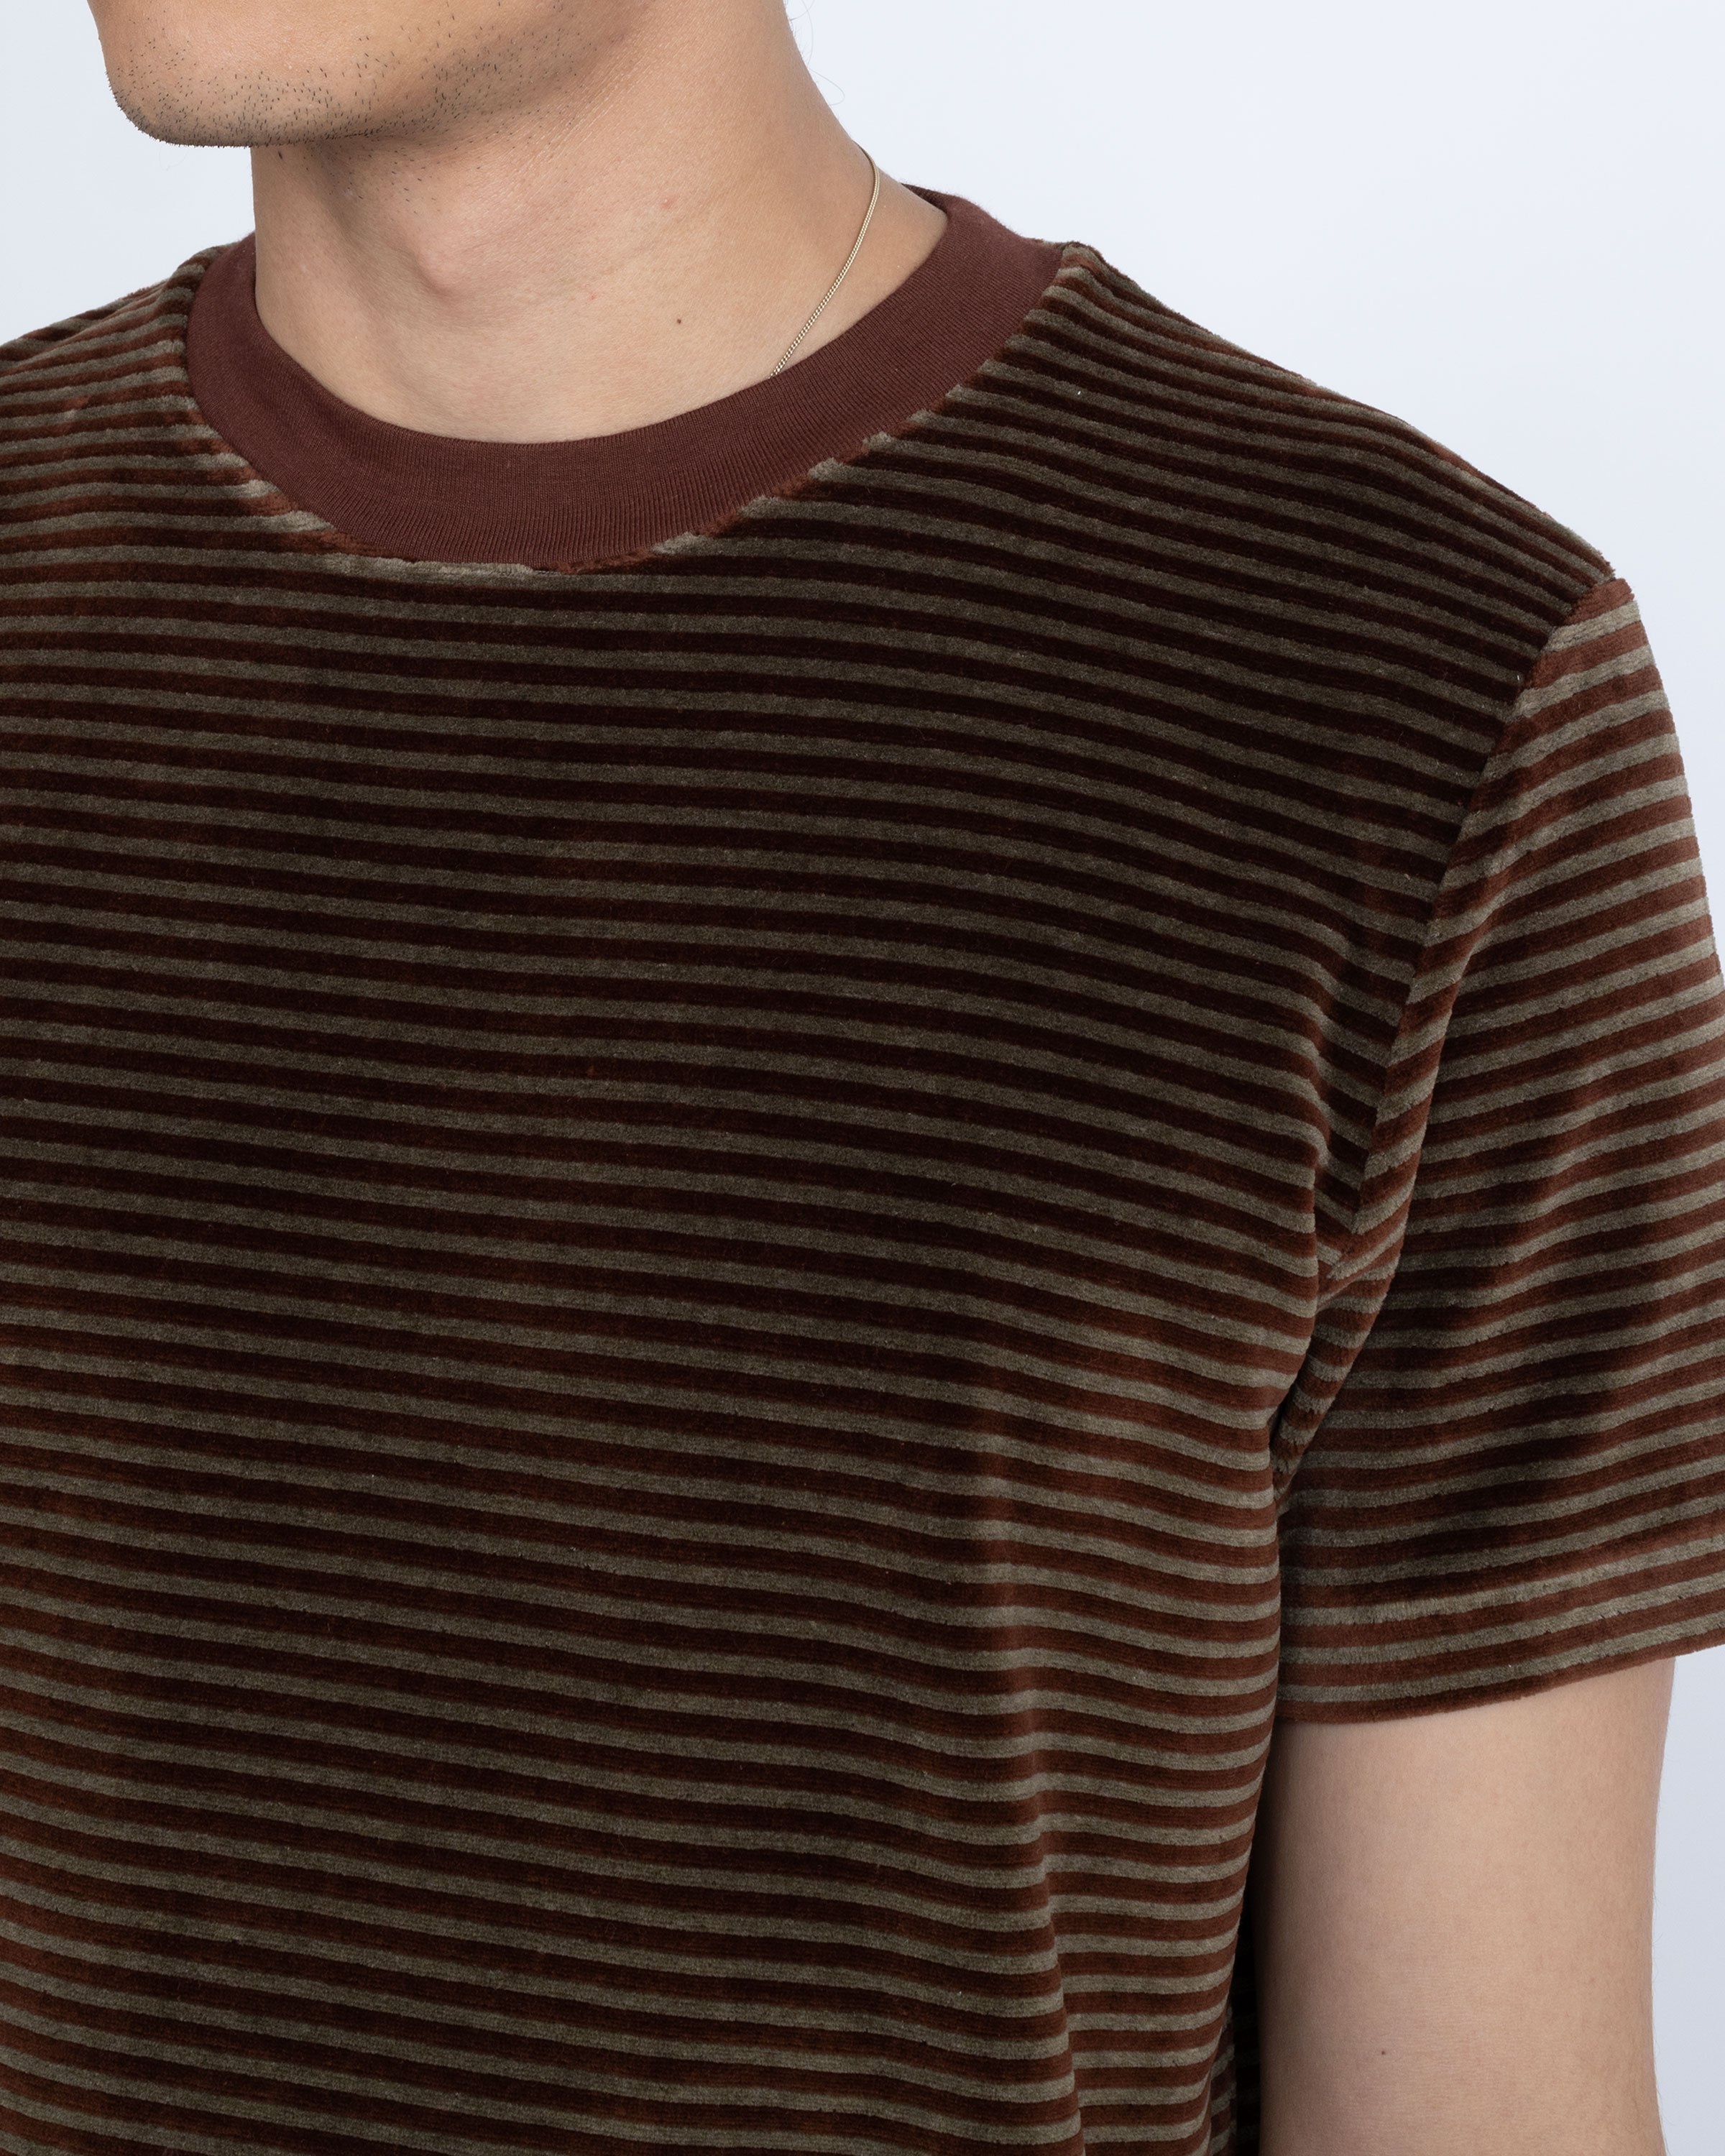 Our Legacy – Hover T-Shirt Brown - T-shirts - Brown - Image 5